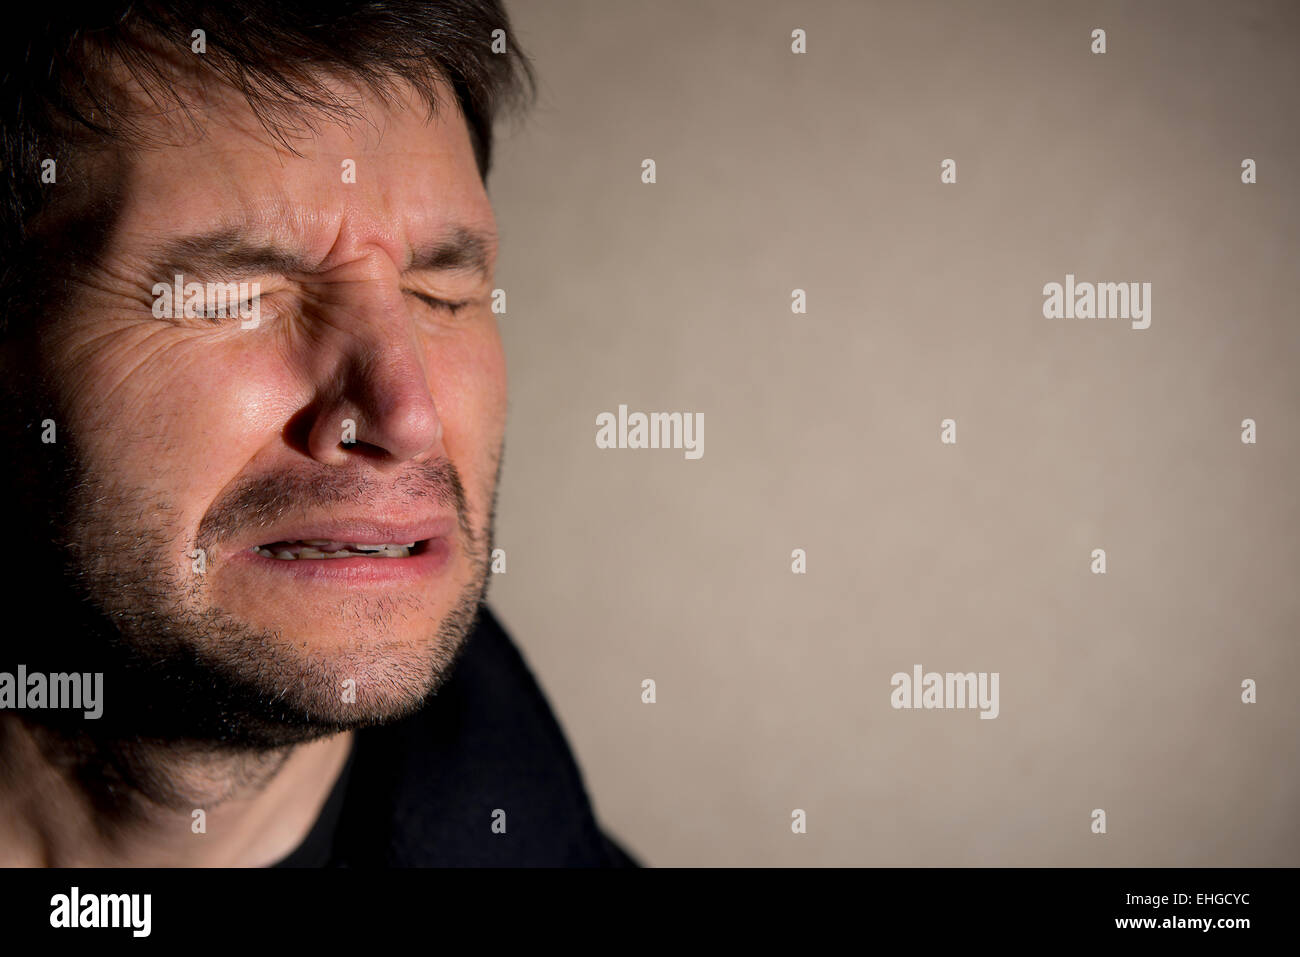 Close up of unshaven man, his eyes are closed and tearful, suffering from emotional pain. Stock Photo